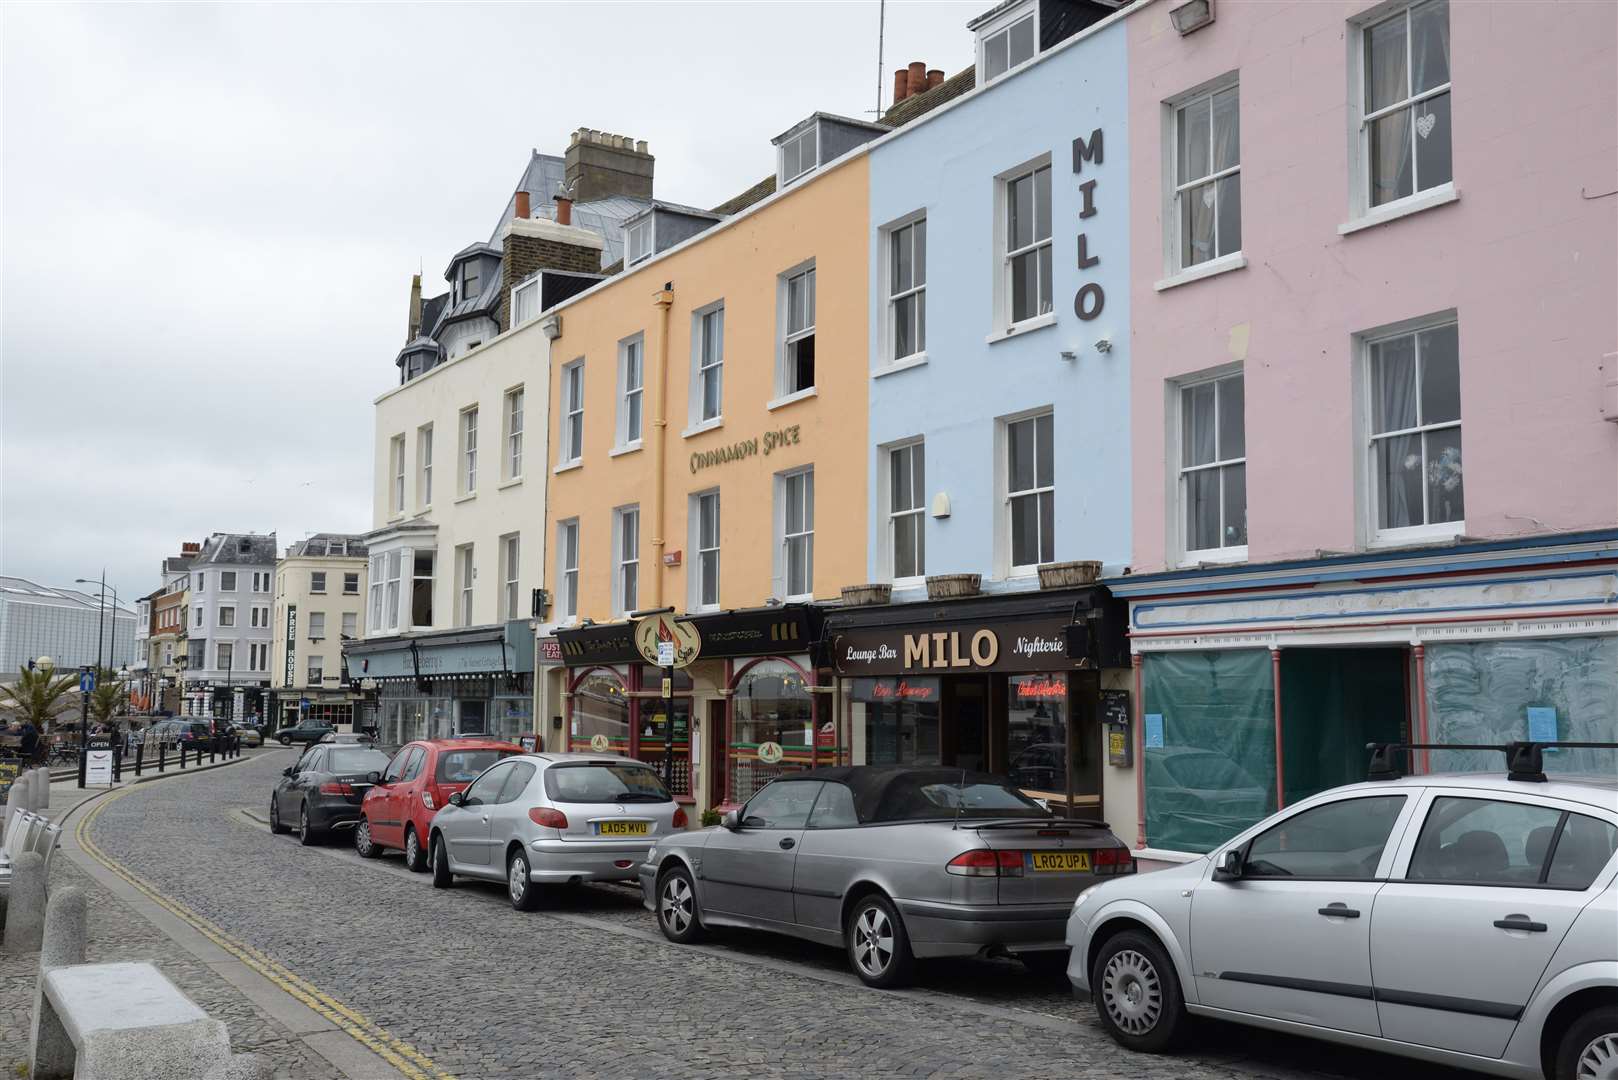 The Old Town area of Margate is a popular Airbnb destination